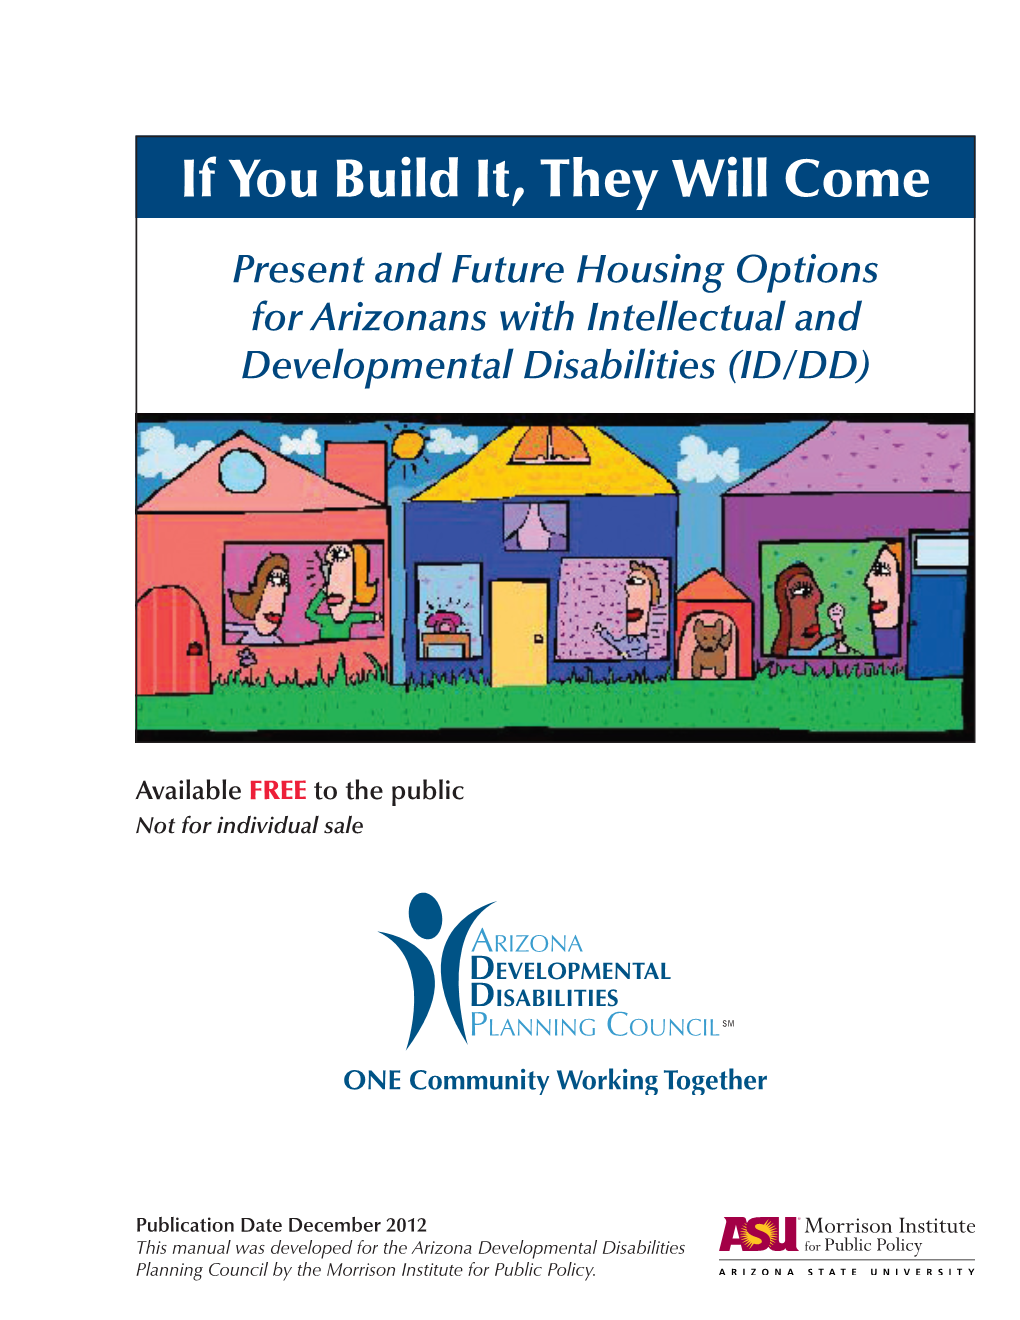 If You Build It They Will Come: Housing Options for Arizonans with DD